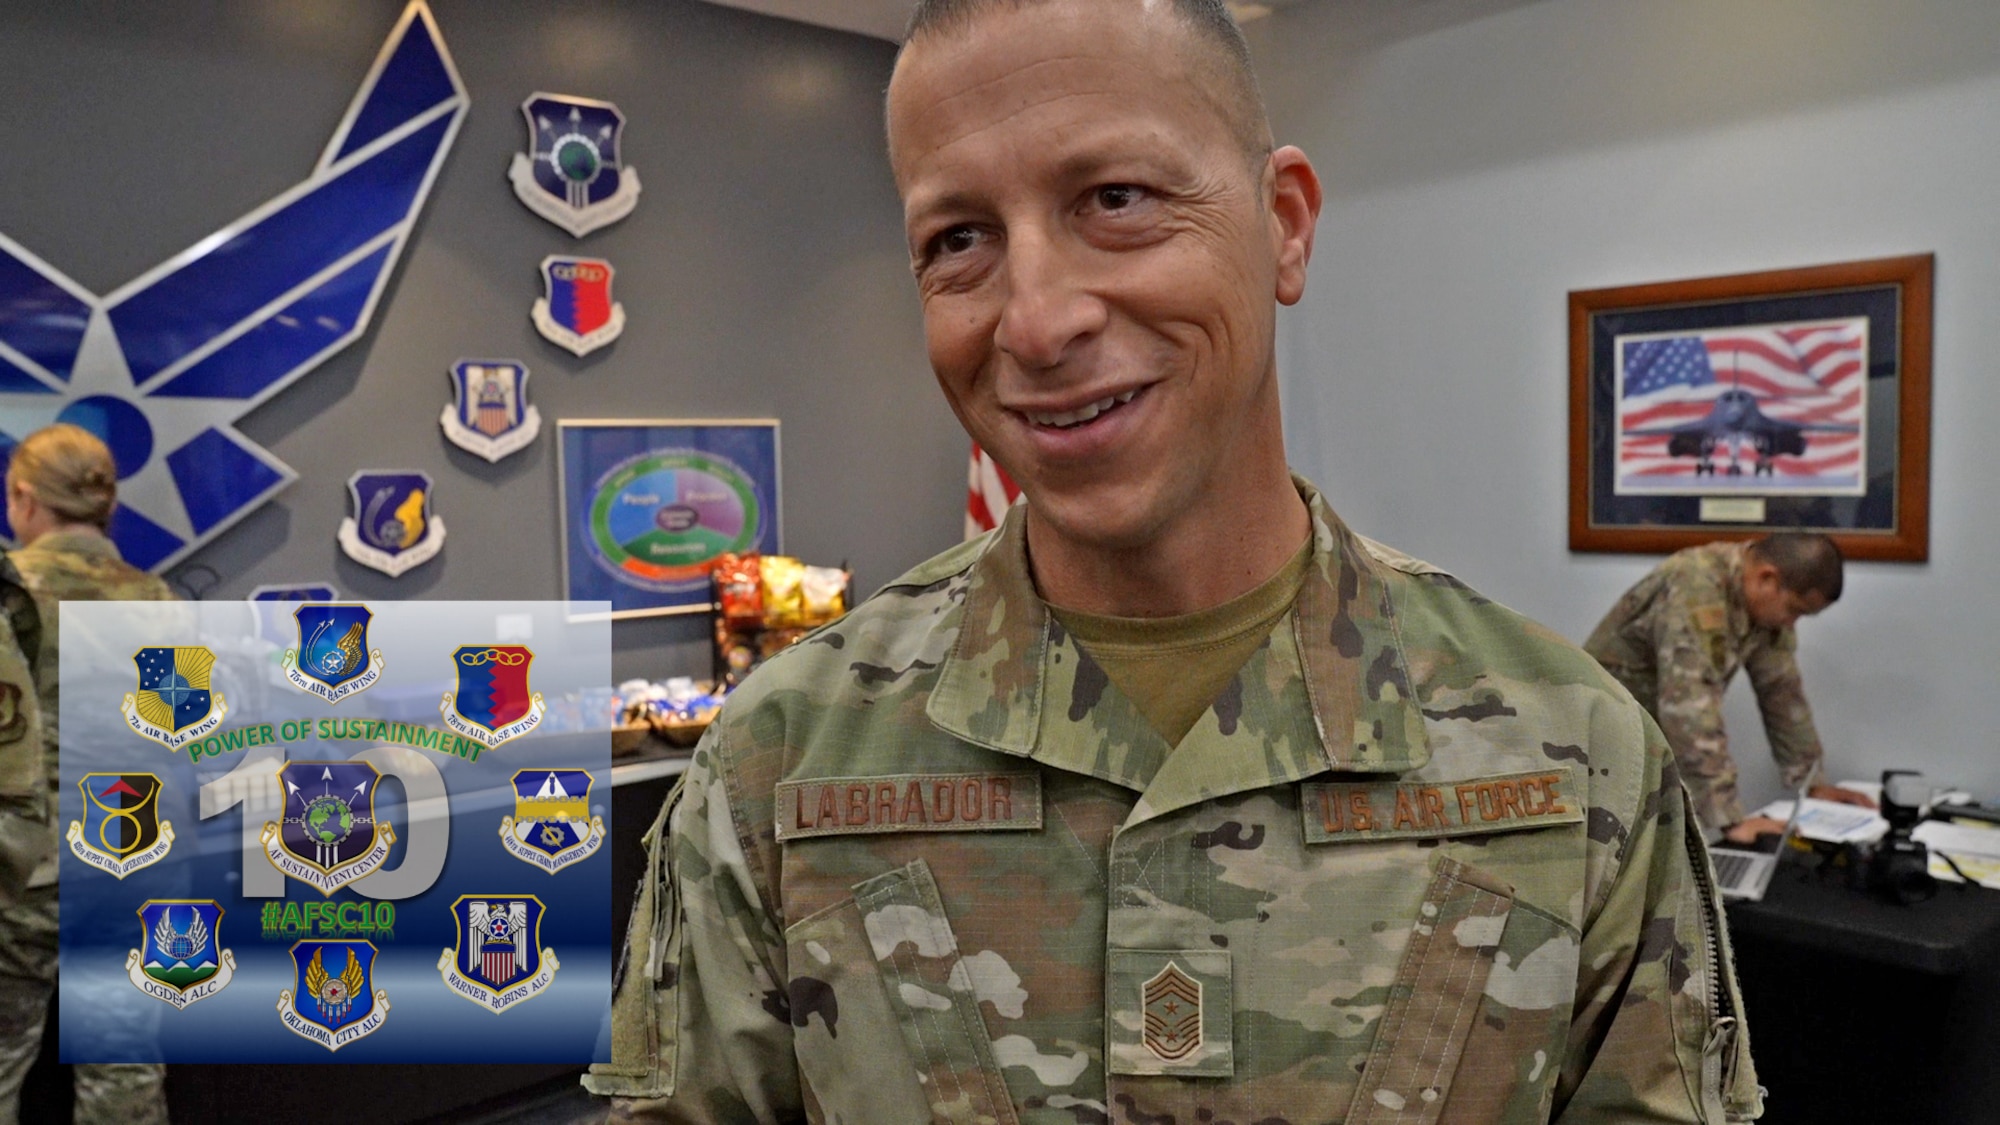 During the AFSC Commander's Summit, April 12 and 13, 2022 at Tinker Air Force Base, leaders like Chief Master Sgt. Carlos Labrador, command chief, 78th Air Base Wing, gave their thoughts about the growth of the Sustainment Center throughout the last 10 years.